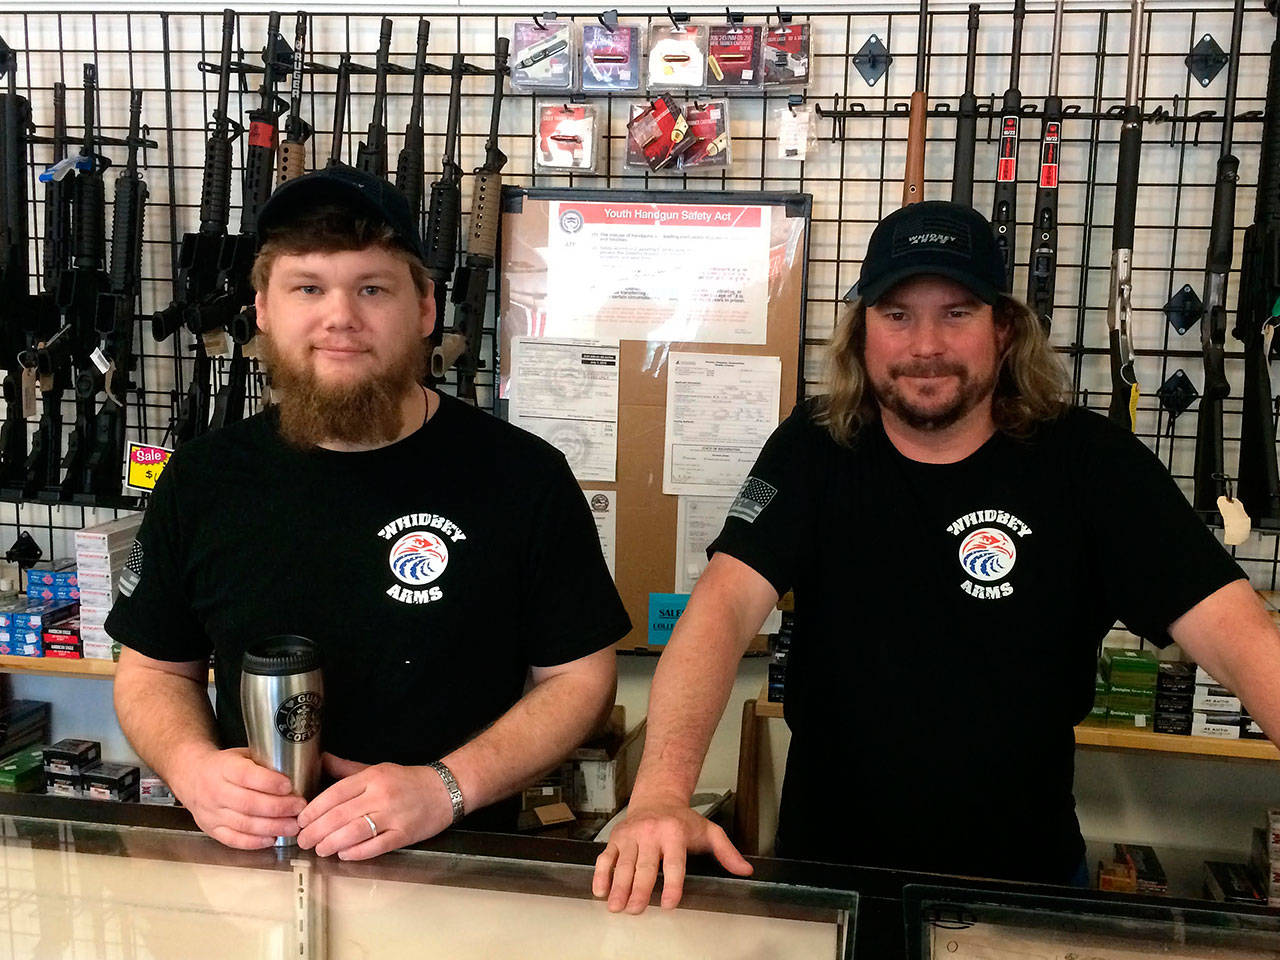 Contributed photo — New Whidbey Arms co-owners Craig Justus (left) and Mark Henny (right) saved the gun shop from closing when they purchased the business.